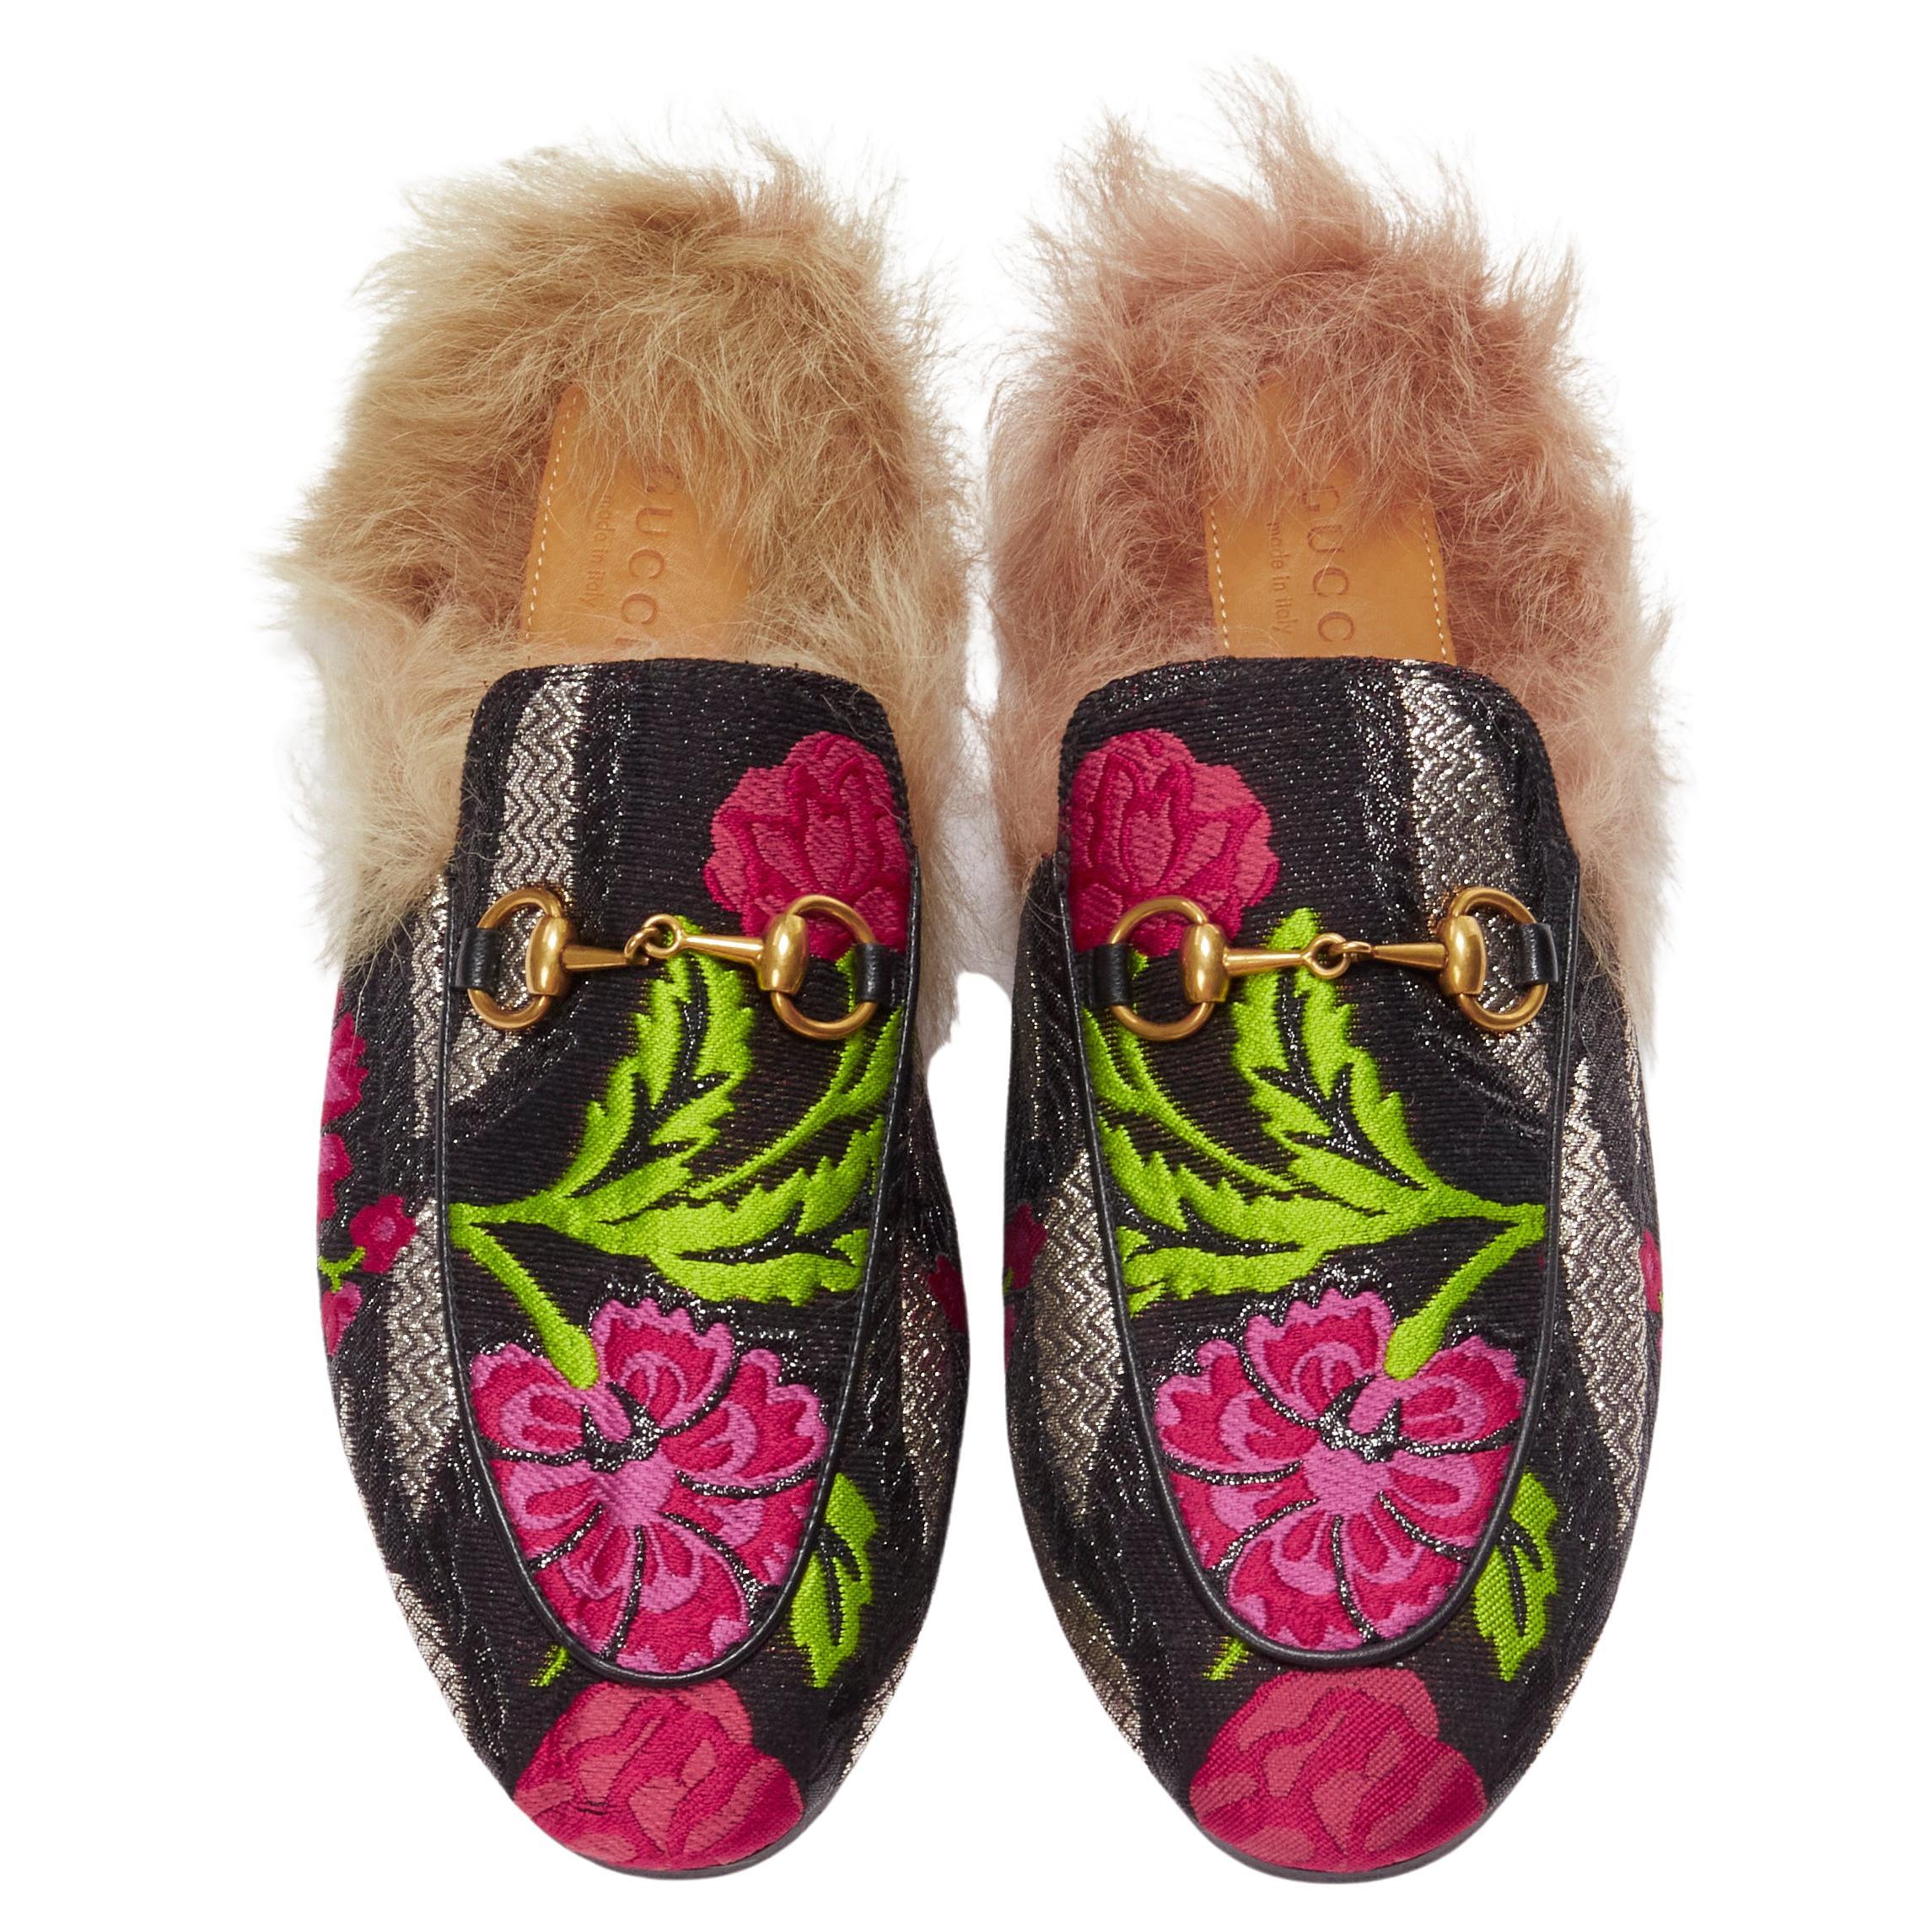 GUCCI Princetown pink floral brocade jacquard fur lined loafer slippers EU37